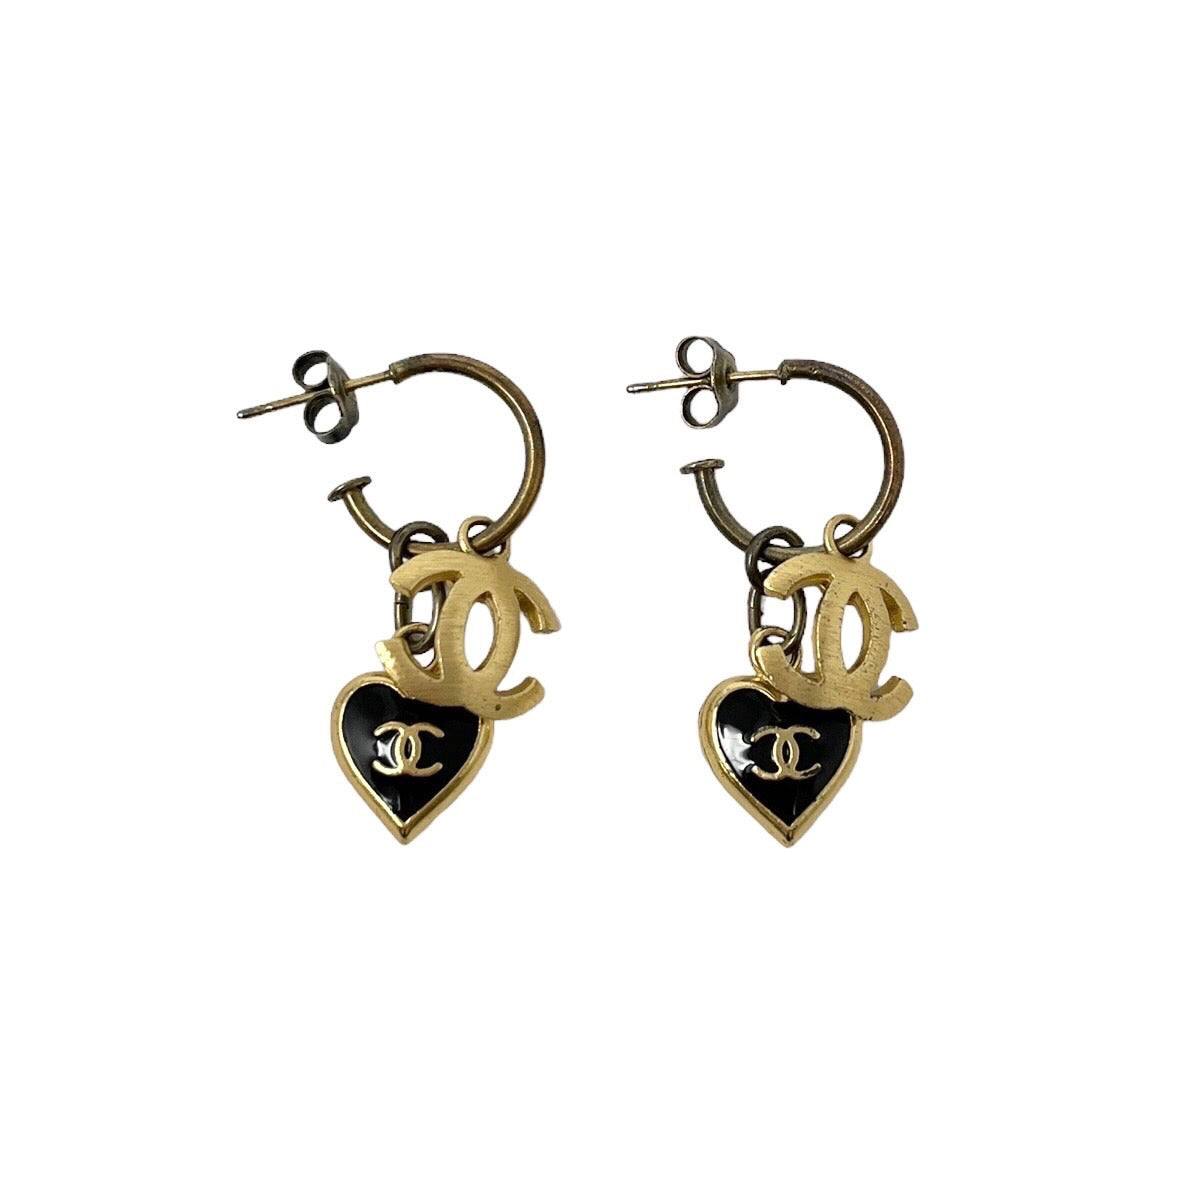 Authentic vintage Chanel earrings gold CC logo heart jewelry for